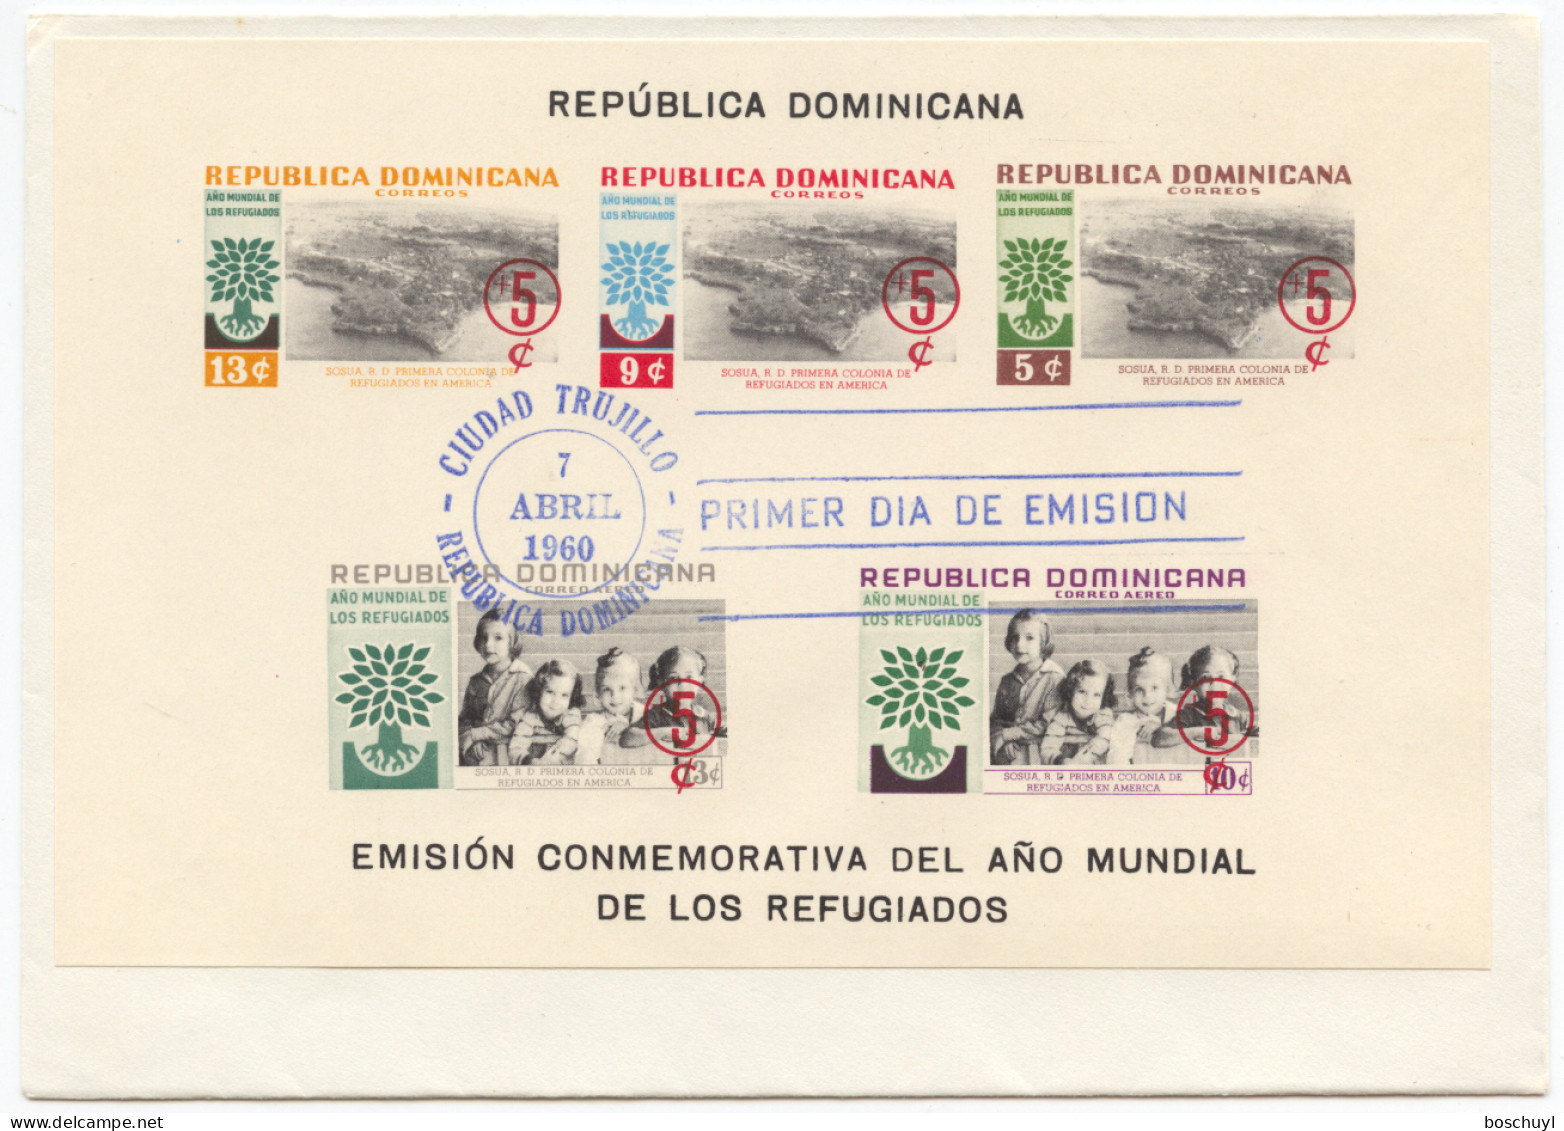 Dominican Republic, 1960, World Refugee Year, WRY, United Nations, Overprinted, On Cover, FD Cancelled, Michel Block 24B - Réfugiés